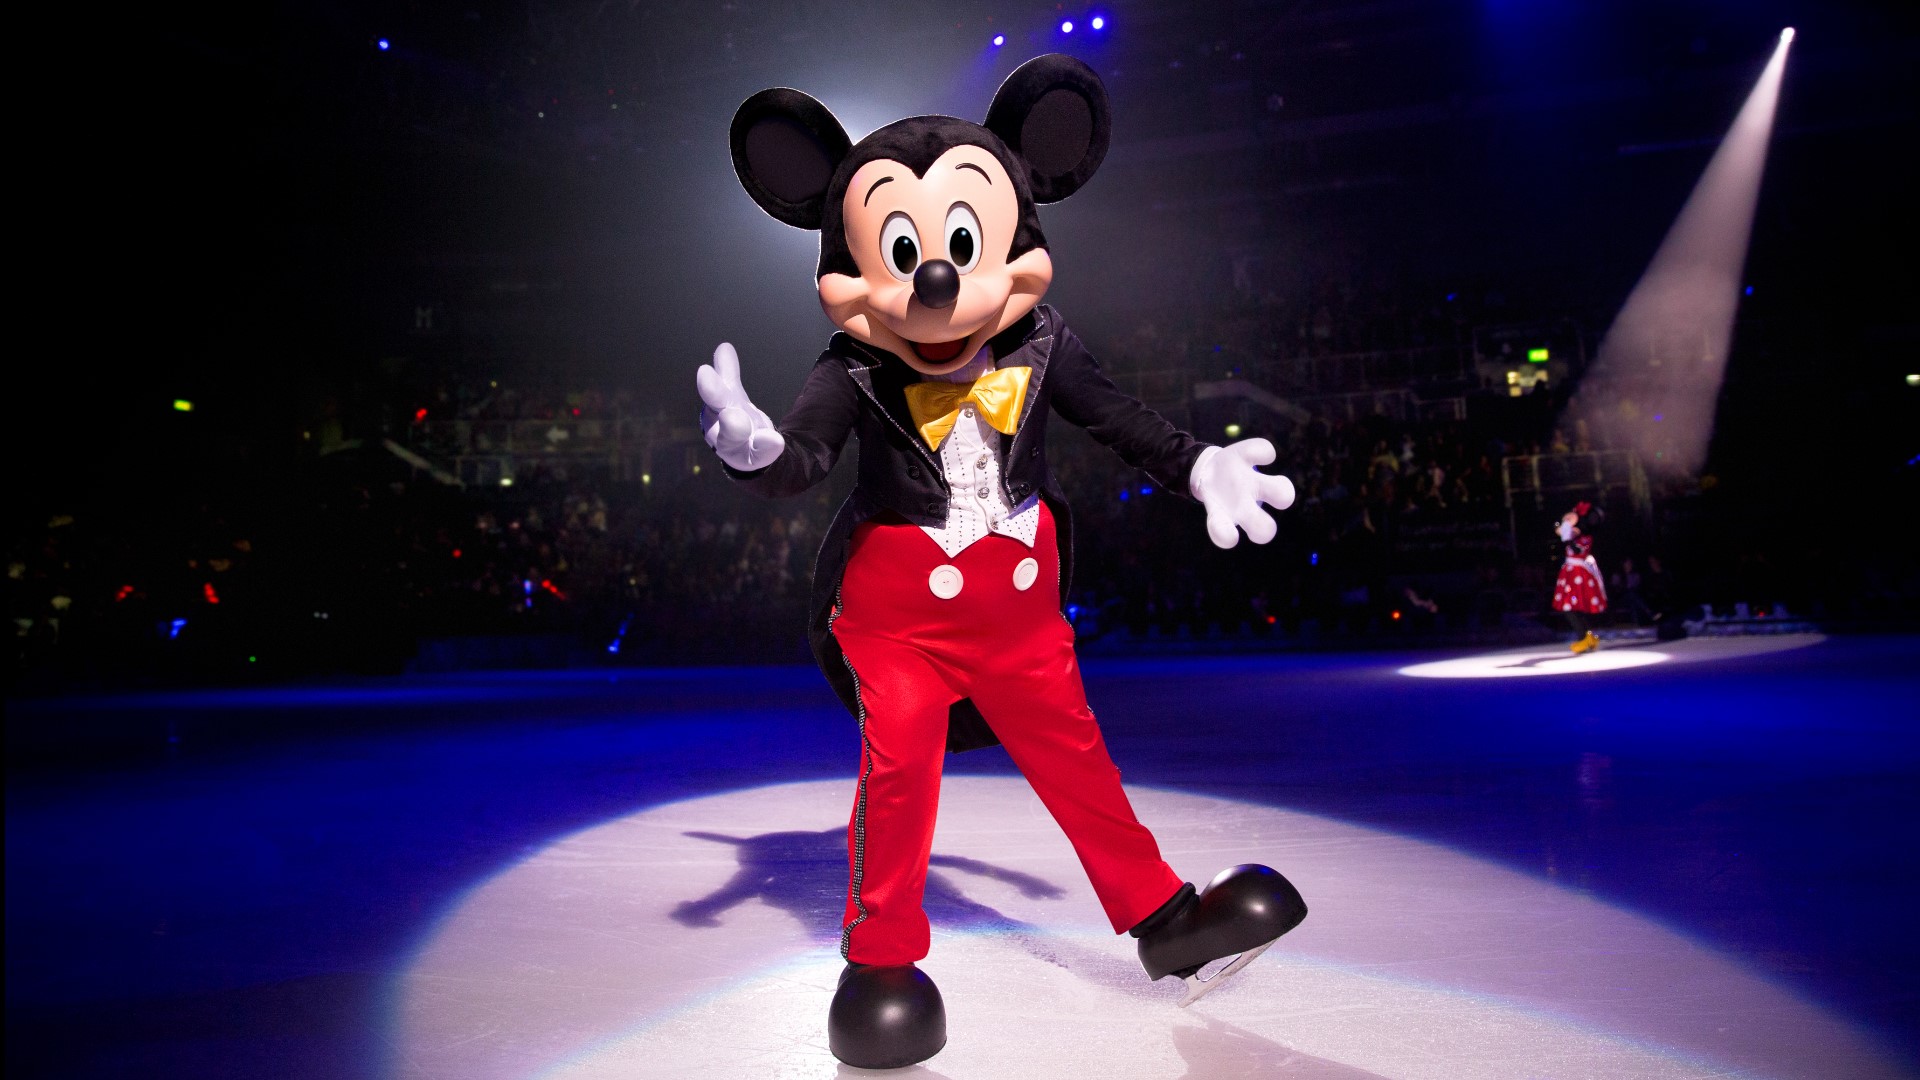 "Disney On Ice presents Mickey and Friends" is coming to Gainbridge Fieldhouse Jan. 19-23, 2022.